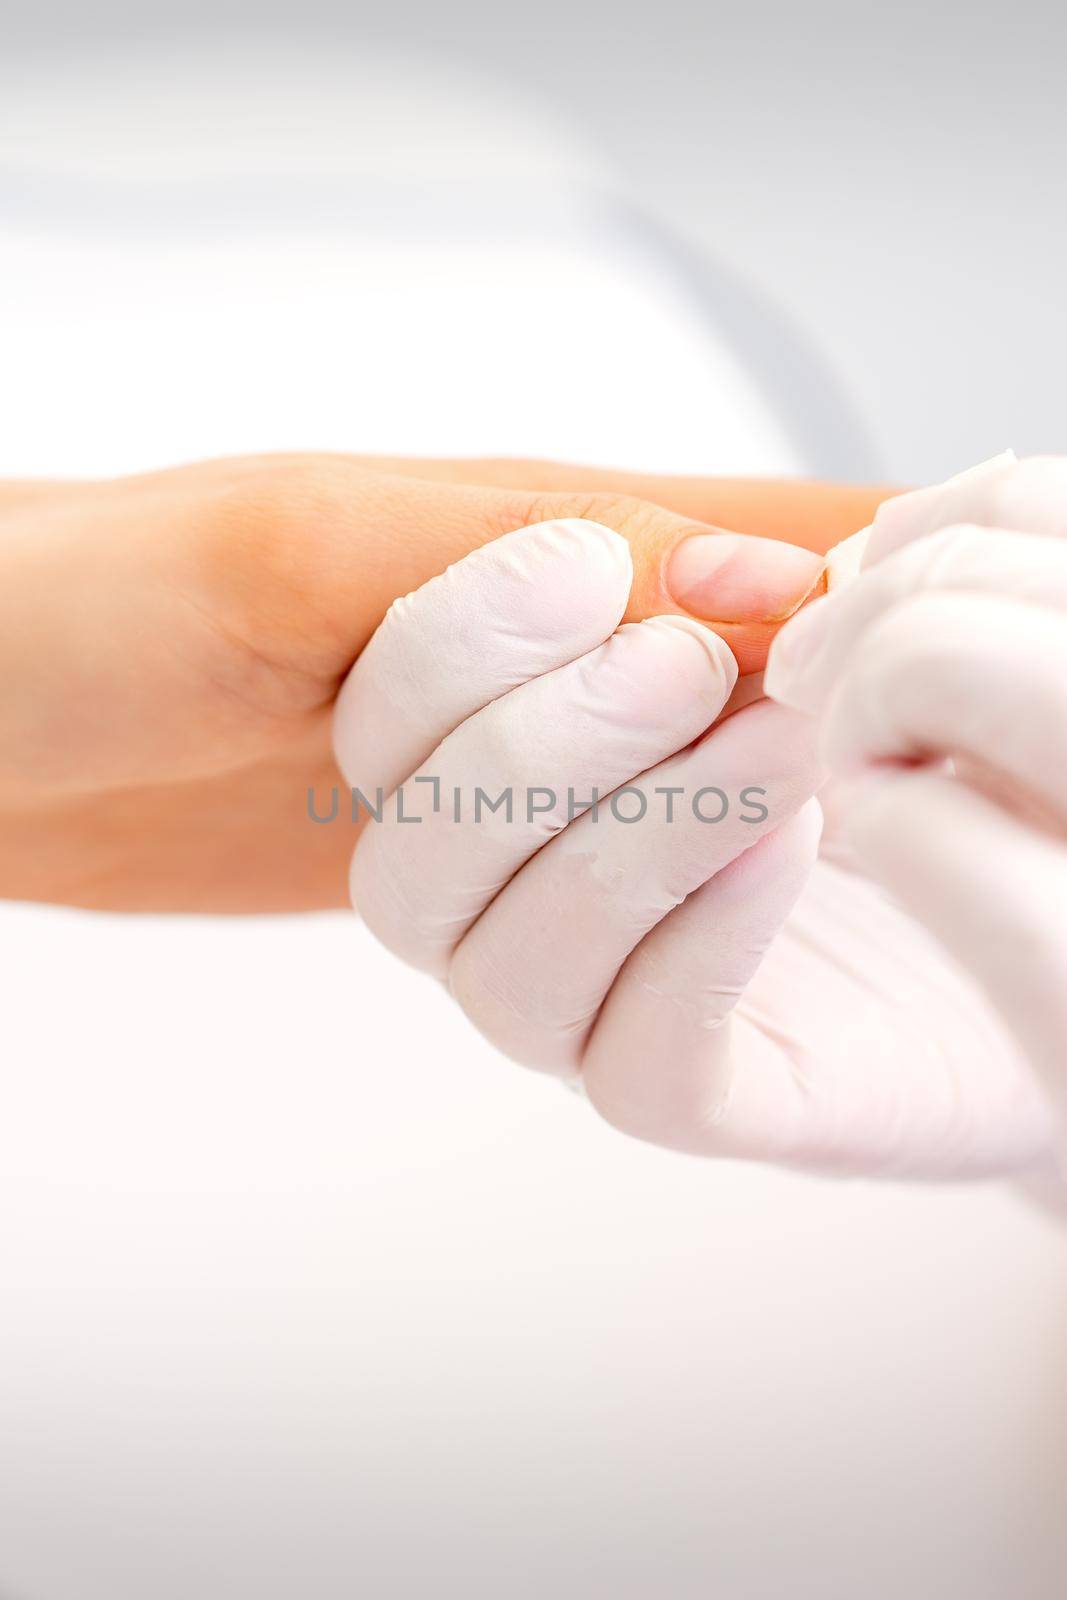 Manicure master wiping the moisturizer from the end of female fingers in beauty salon